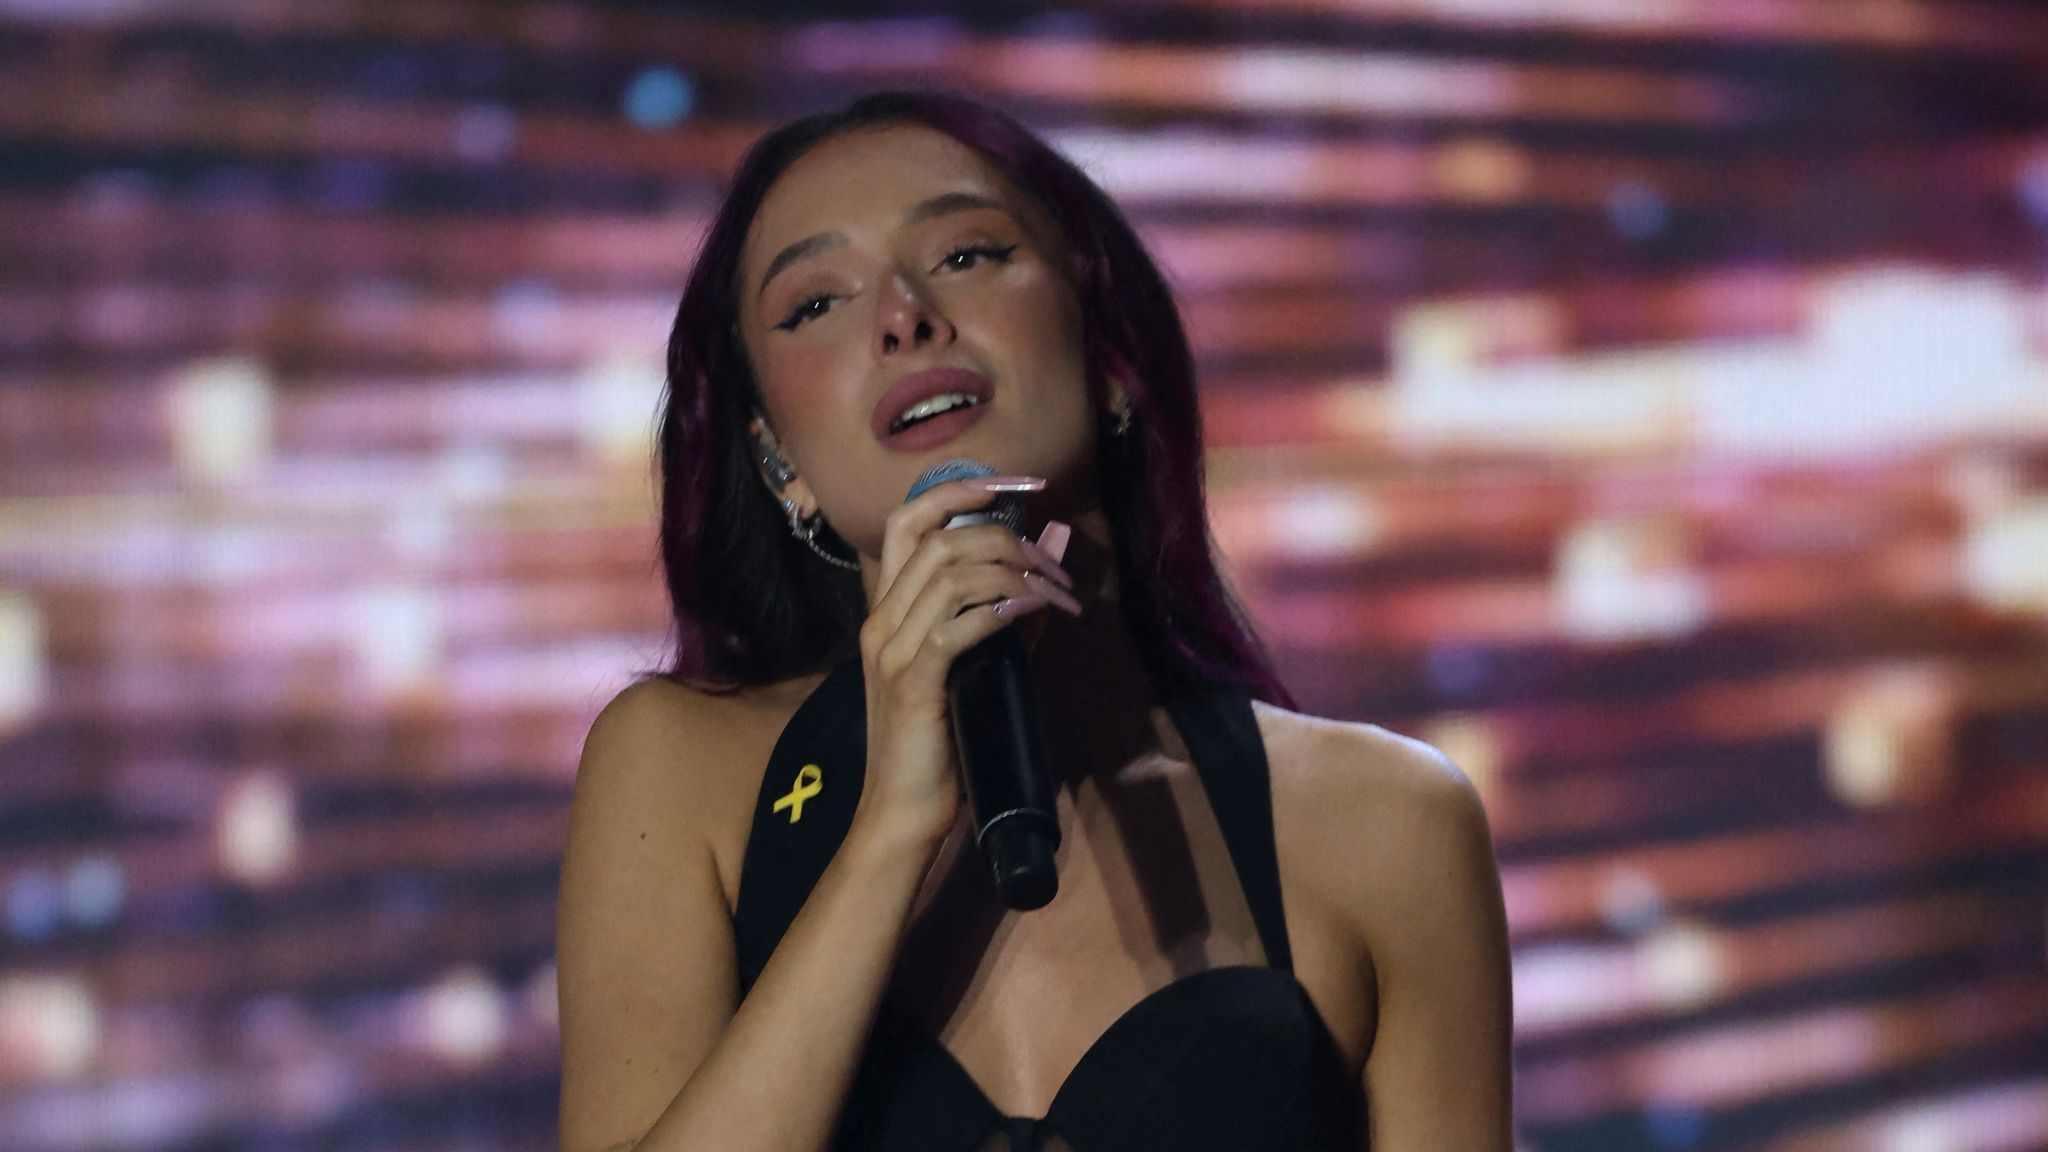 Israel unveils new Eurovision song after previous entry appeared to